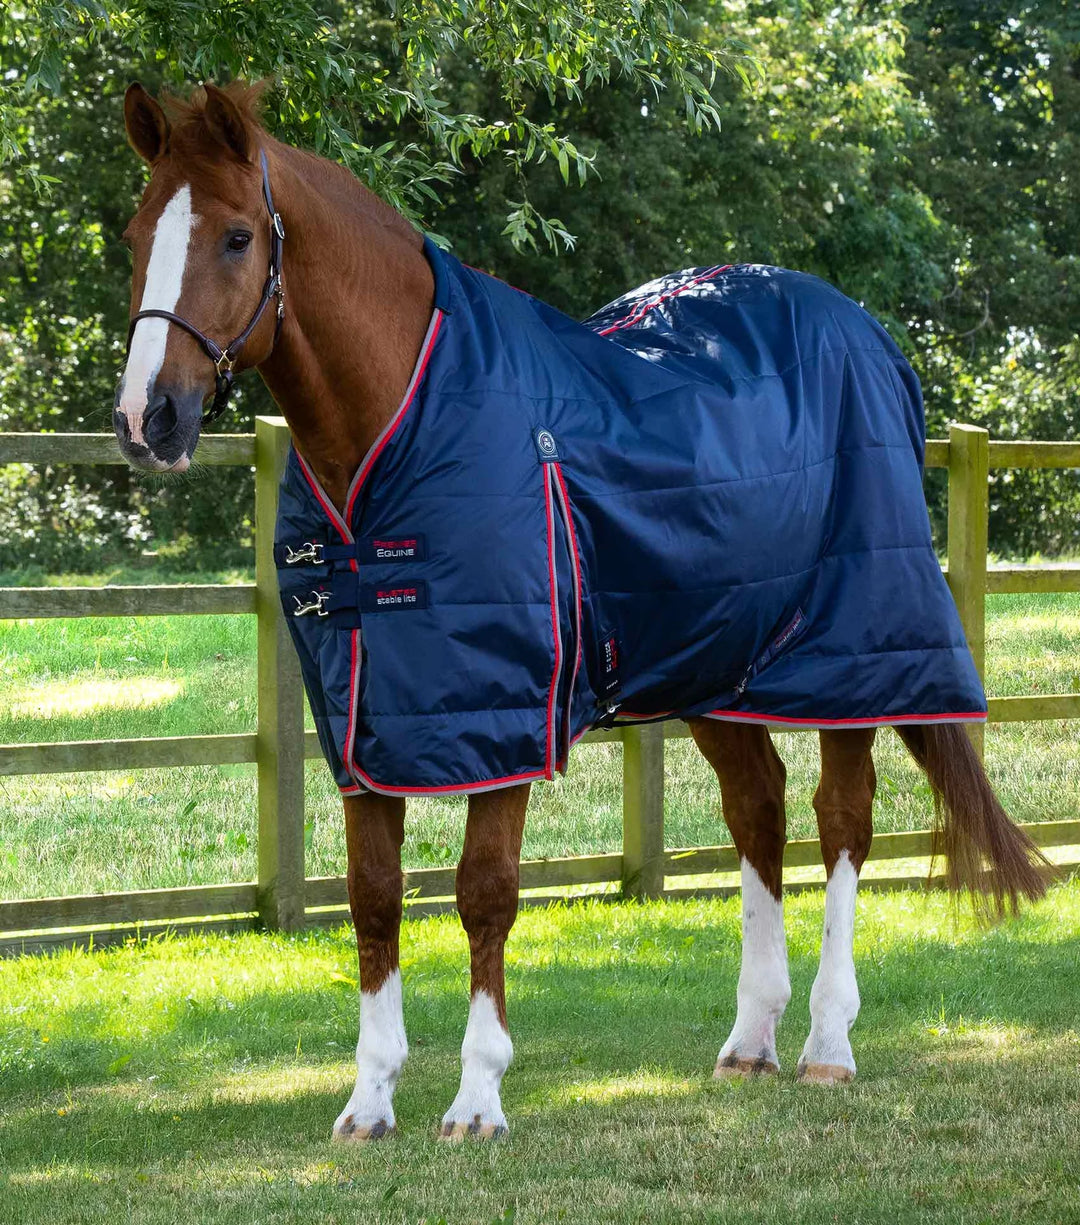 The Premier Equine Buster 100g Lightweight Stable Lite Rug in Navy#Navy